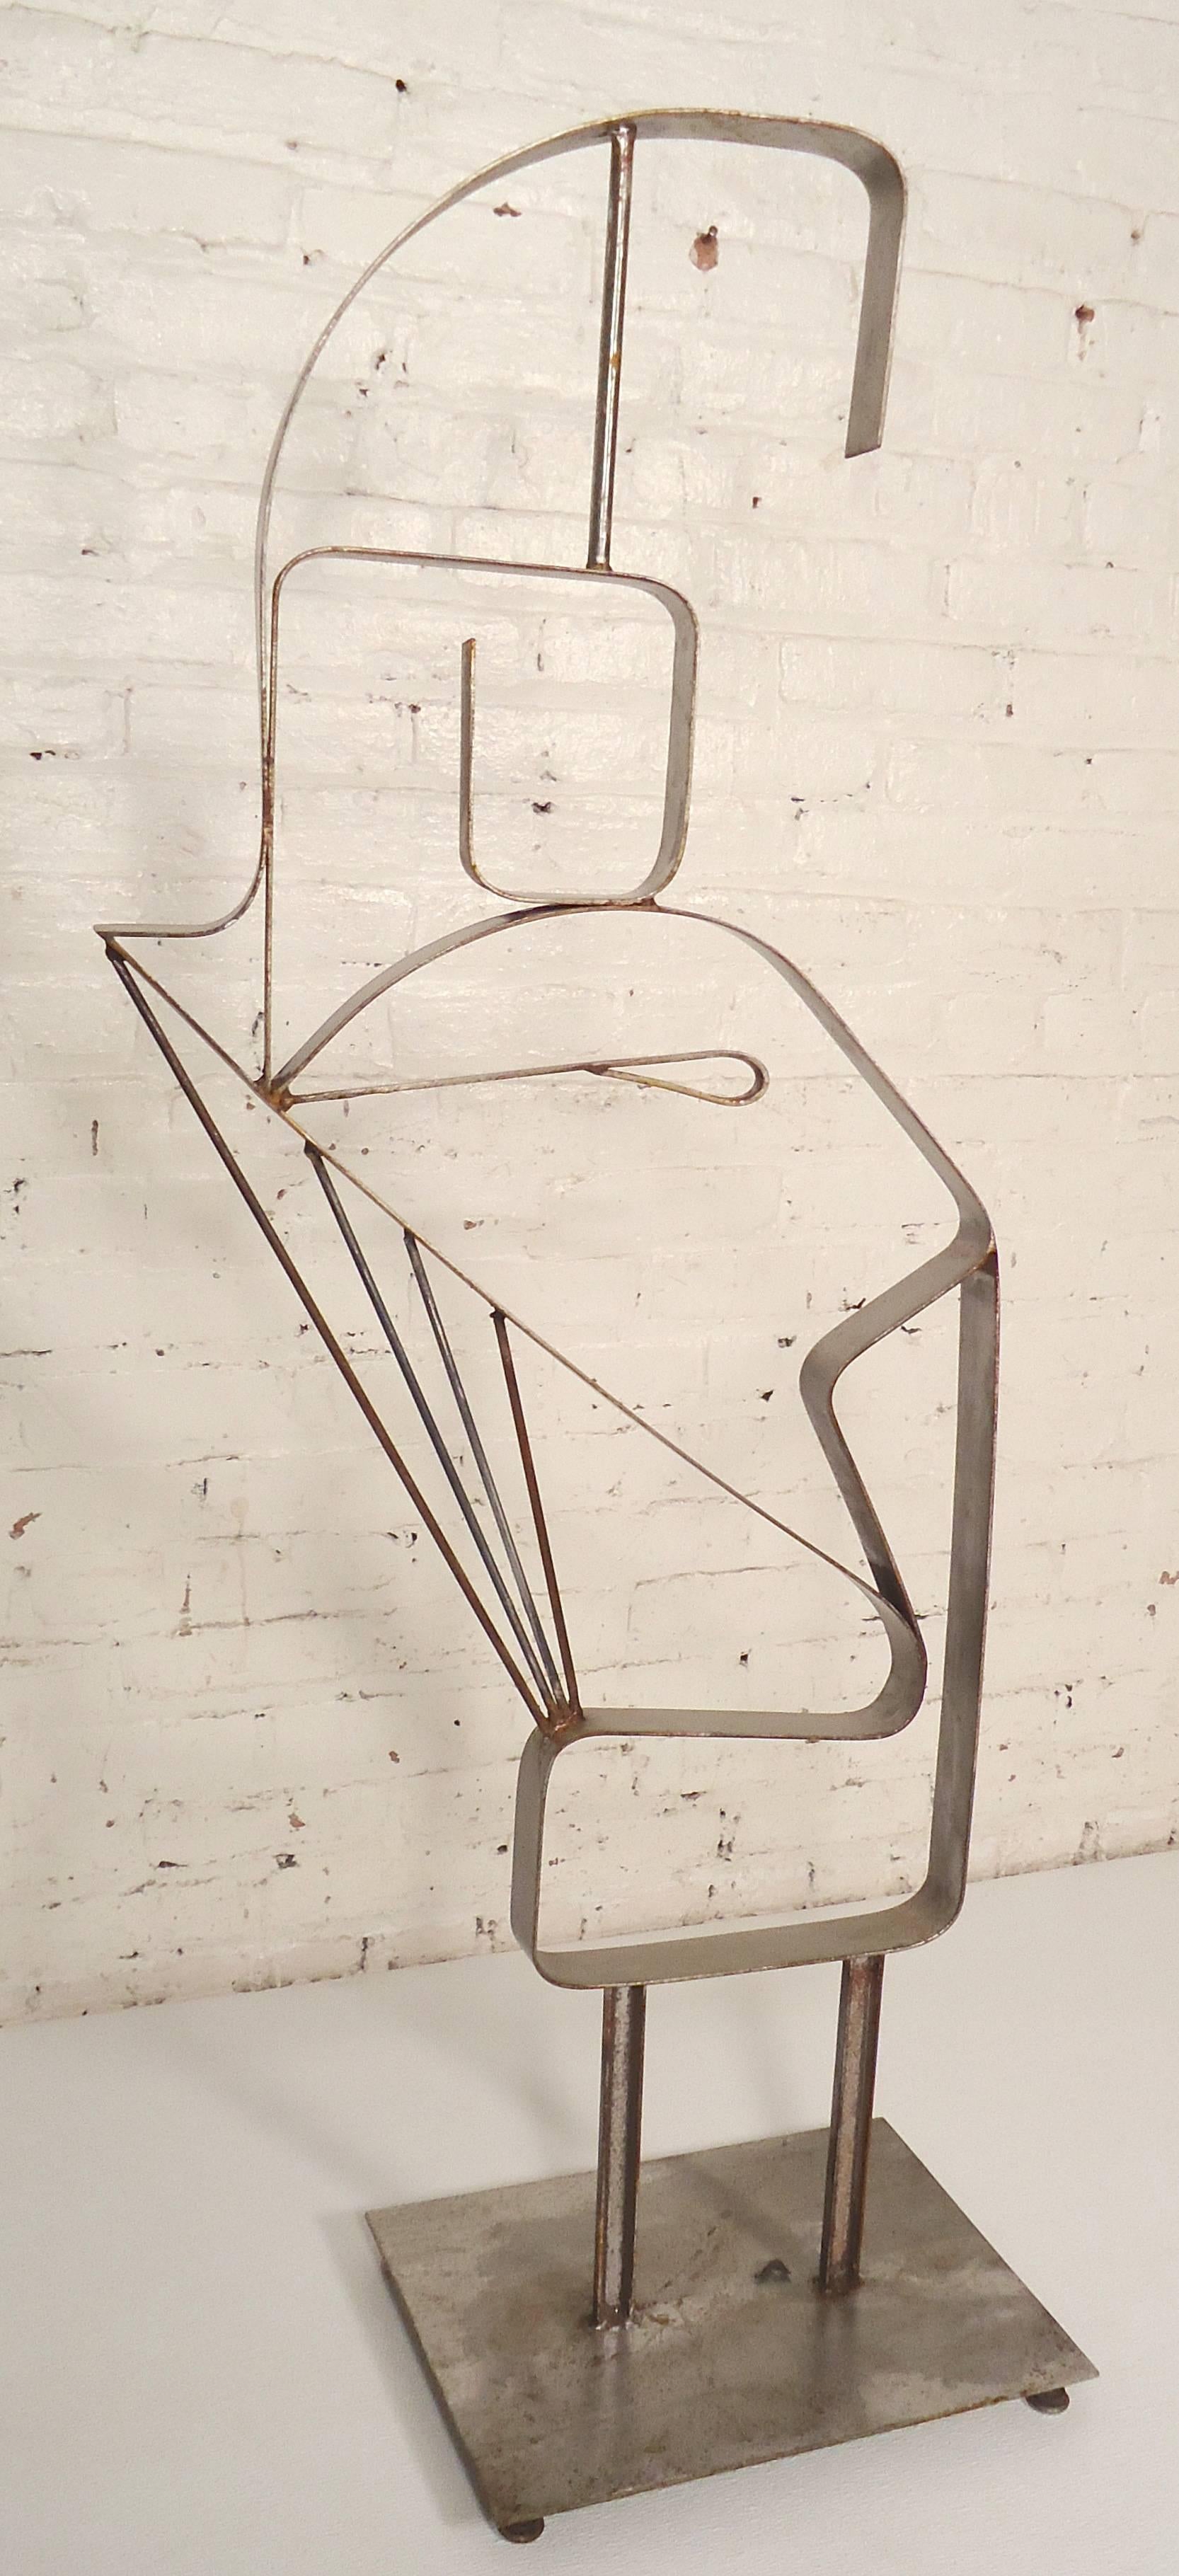 Unusual artwork made of metal, with an abstract design. Great decoration for indoor or outdoor use.

(Please confirm item location NY or NJ with dealer).
       